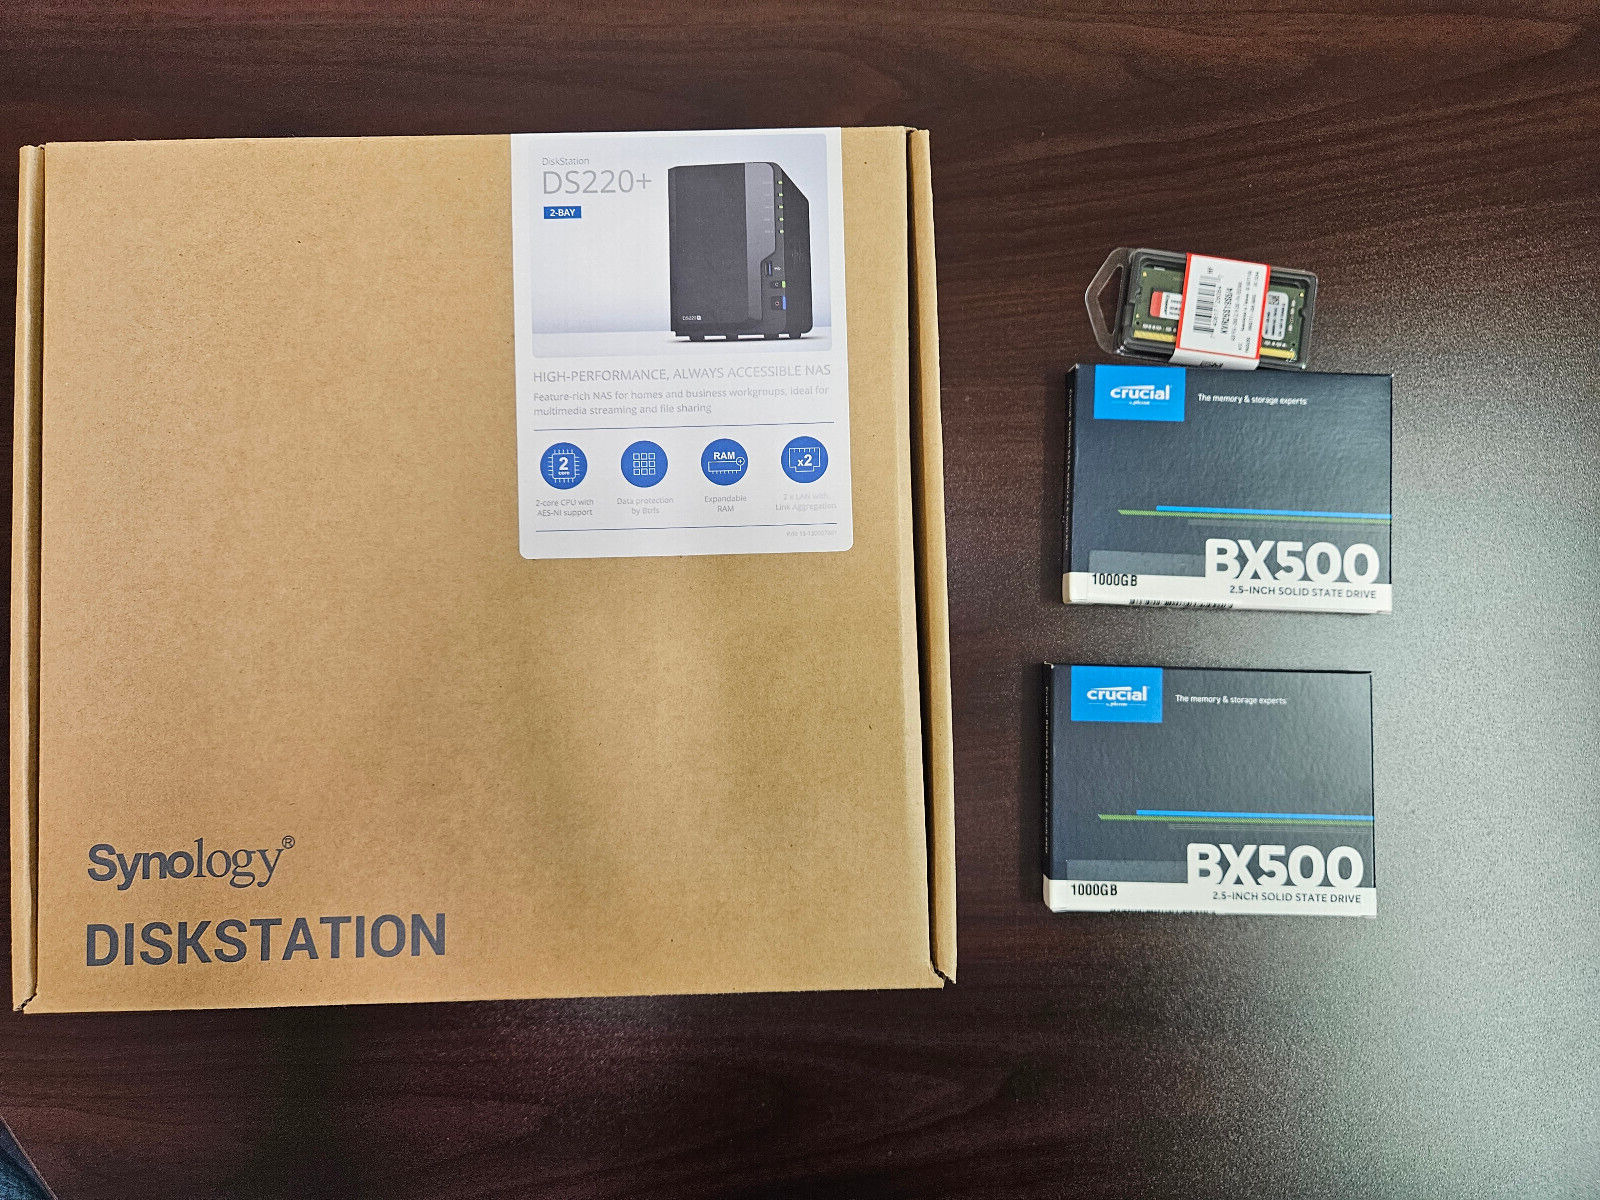 NEW Synology DiskStation DS220+ 2-Bay NAS Enclosure - 2TB Included